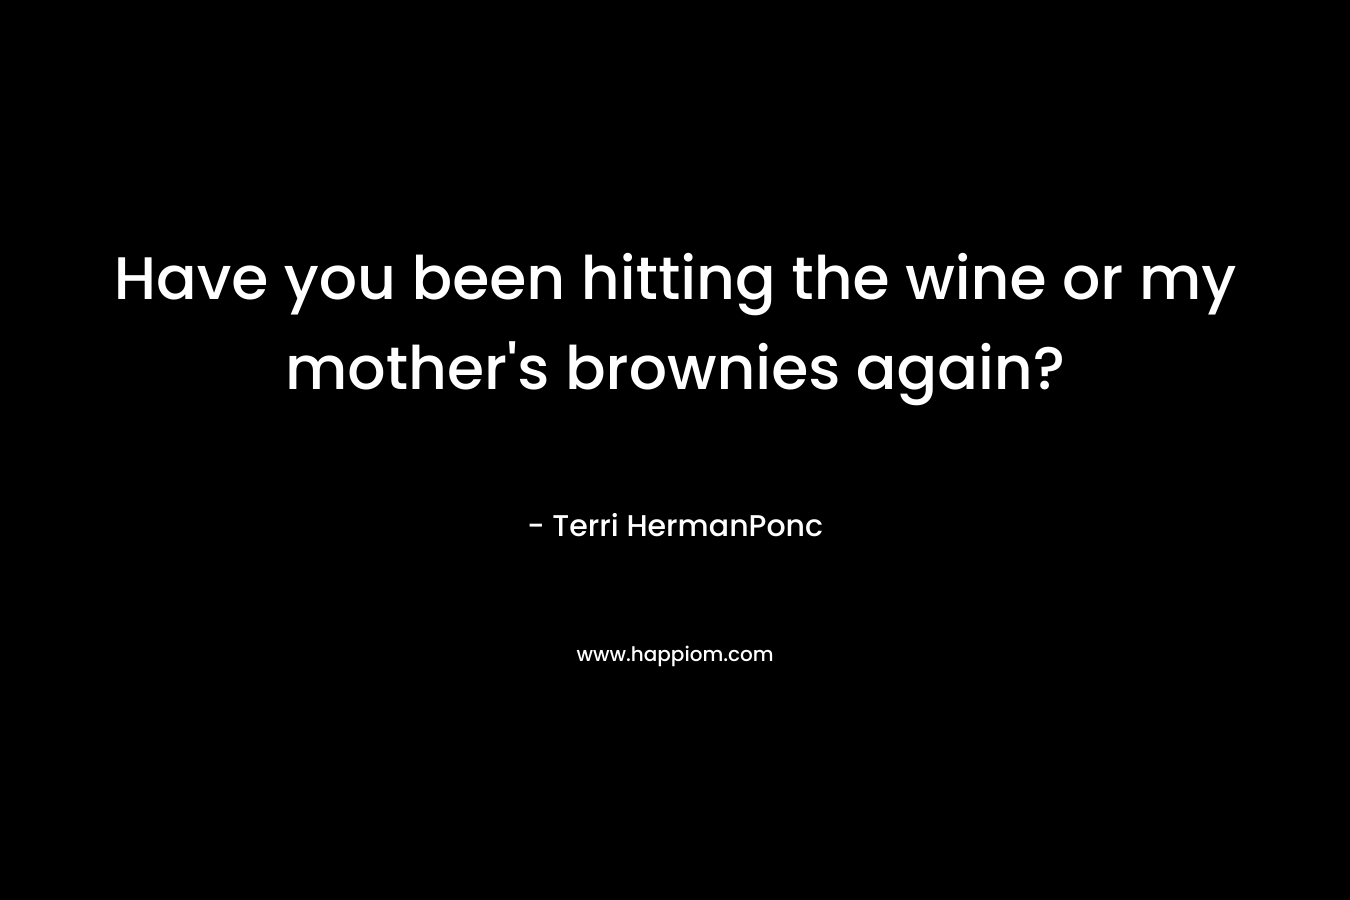 Have you been hitting the wine or my mother’s brownies again? – Terri HermanPonc